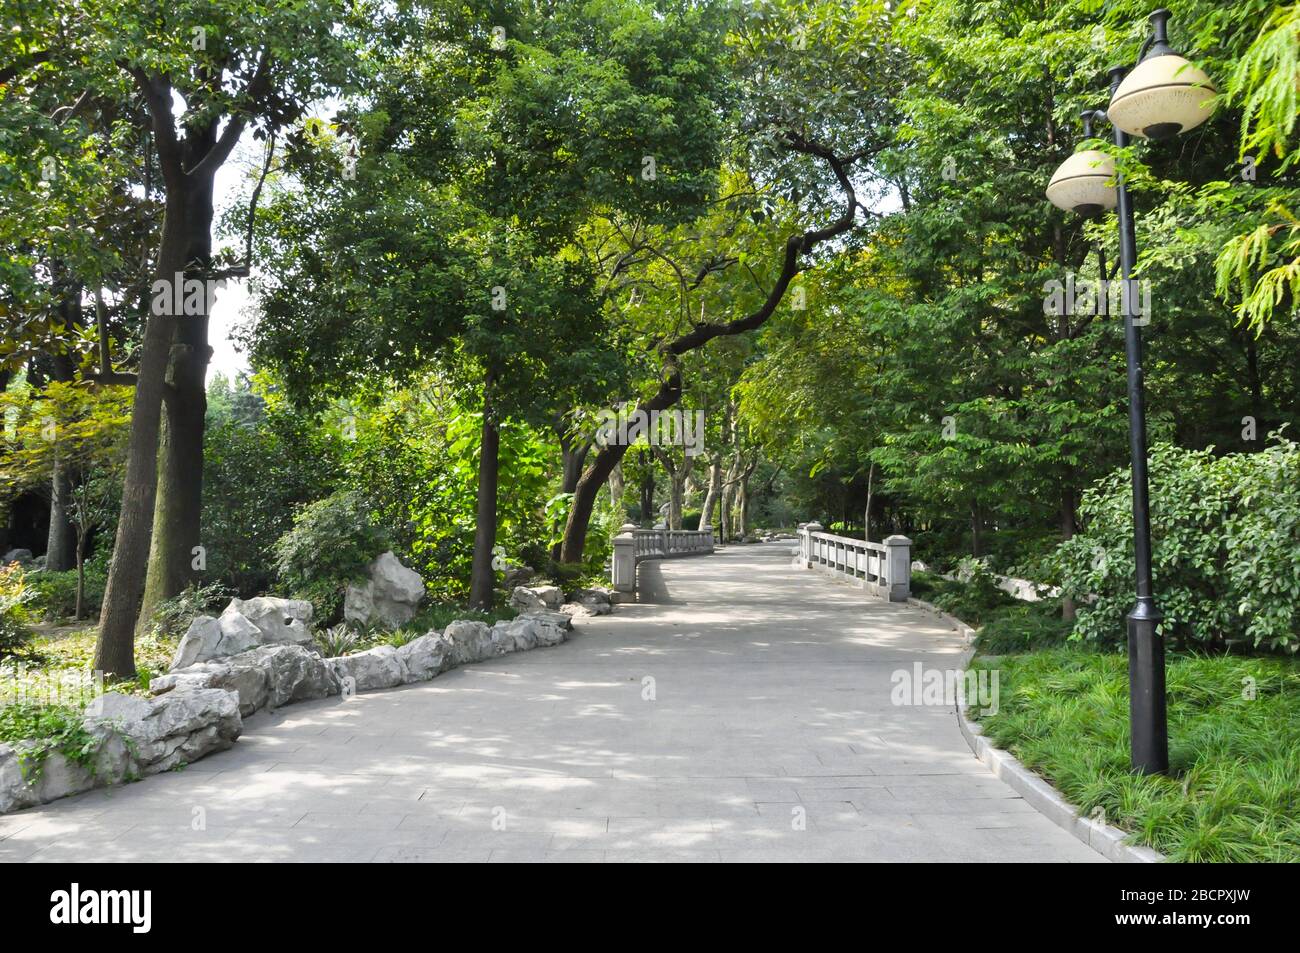 A concrete path through a park in the French concession in Shanghai, China. The path is surrounded by trees and lanterns and leads to a small white br Stock Photo